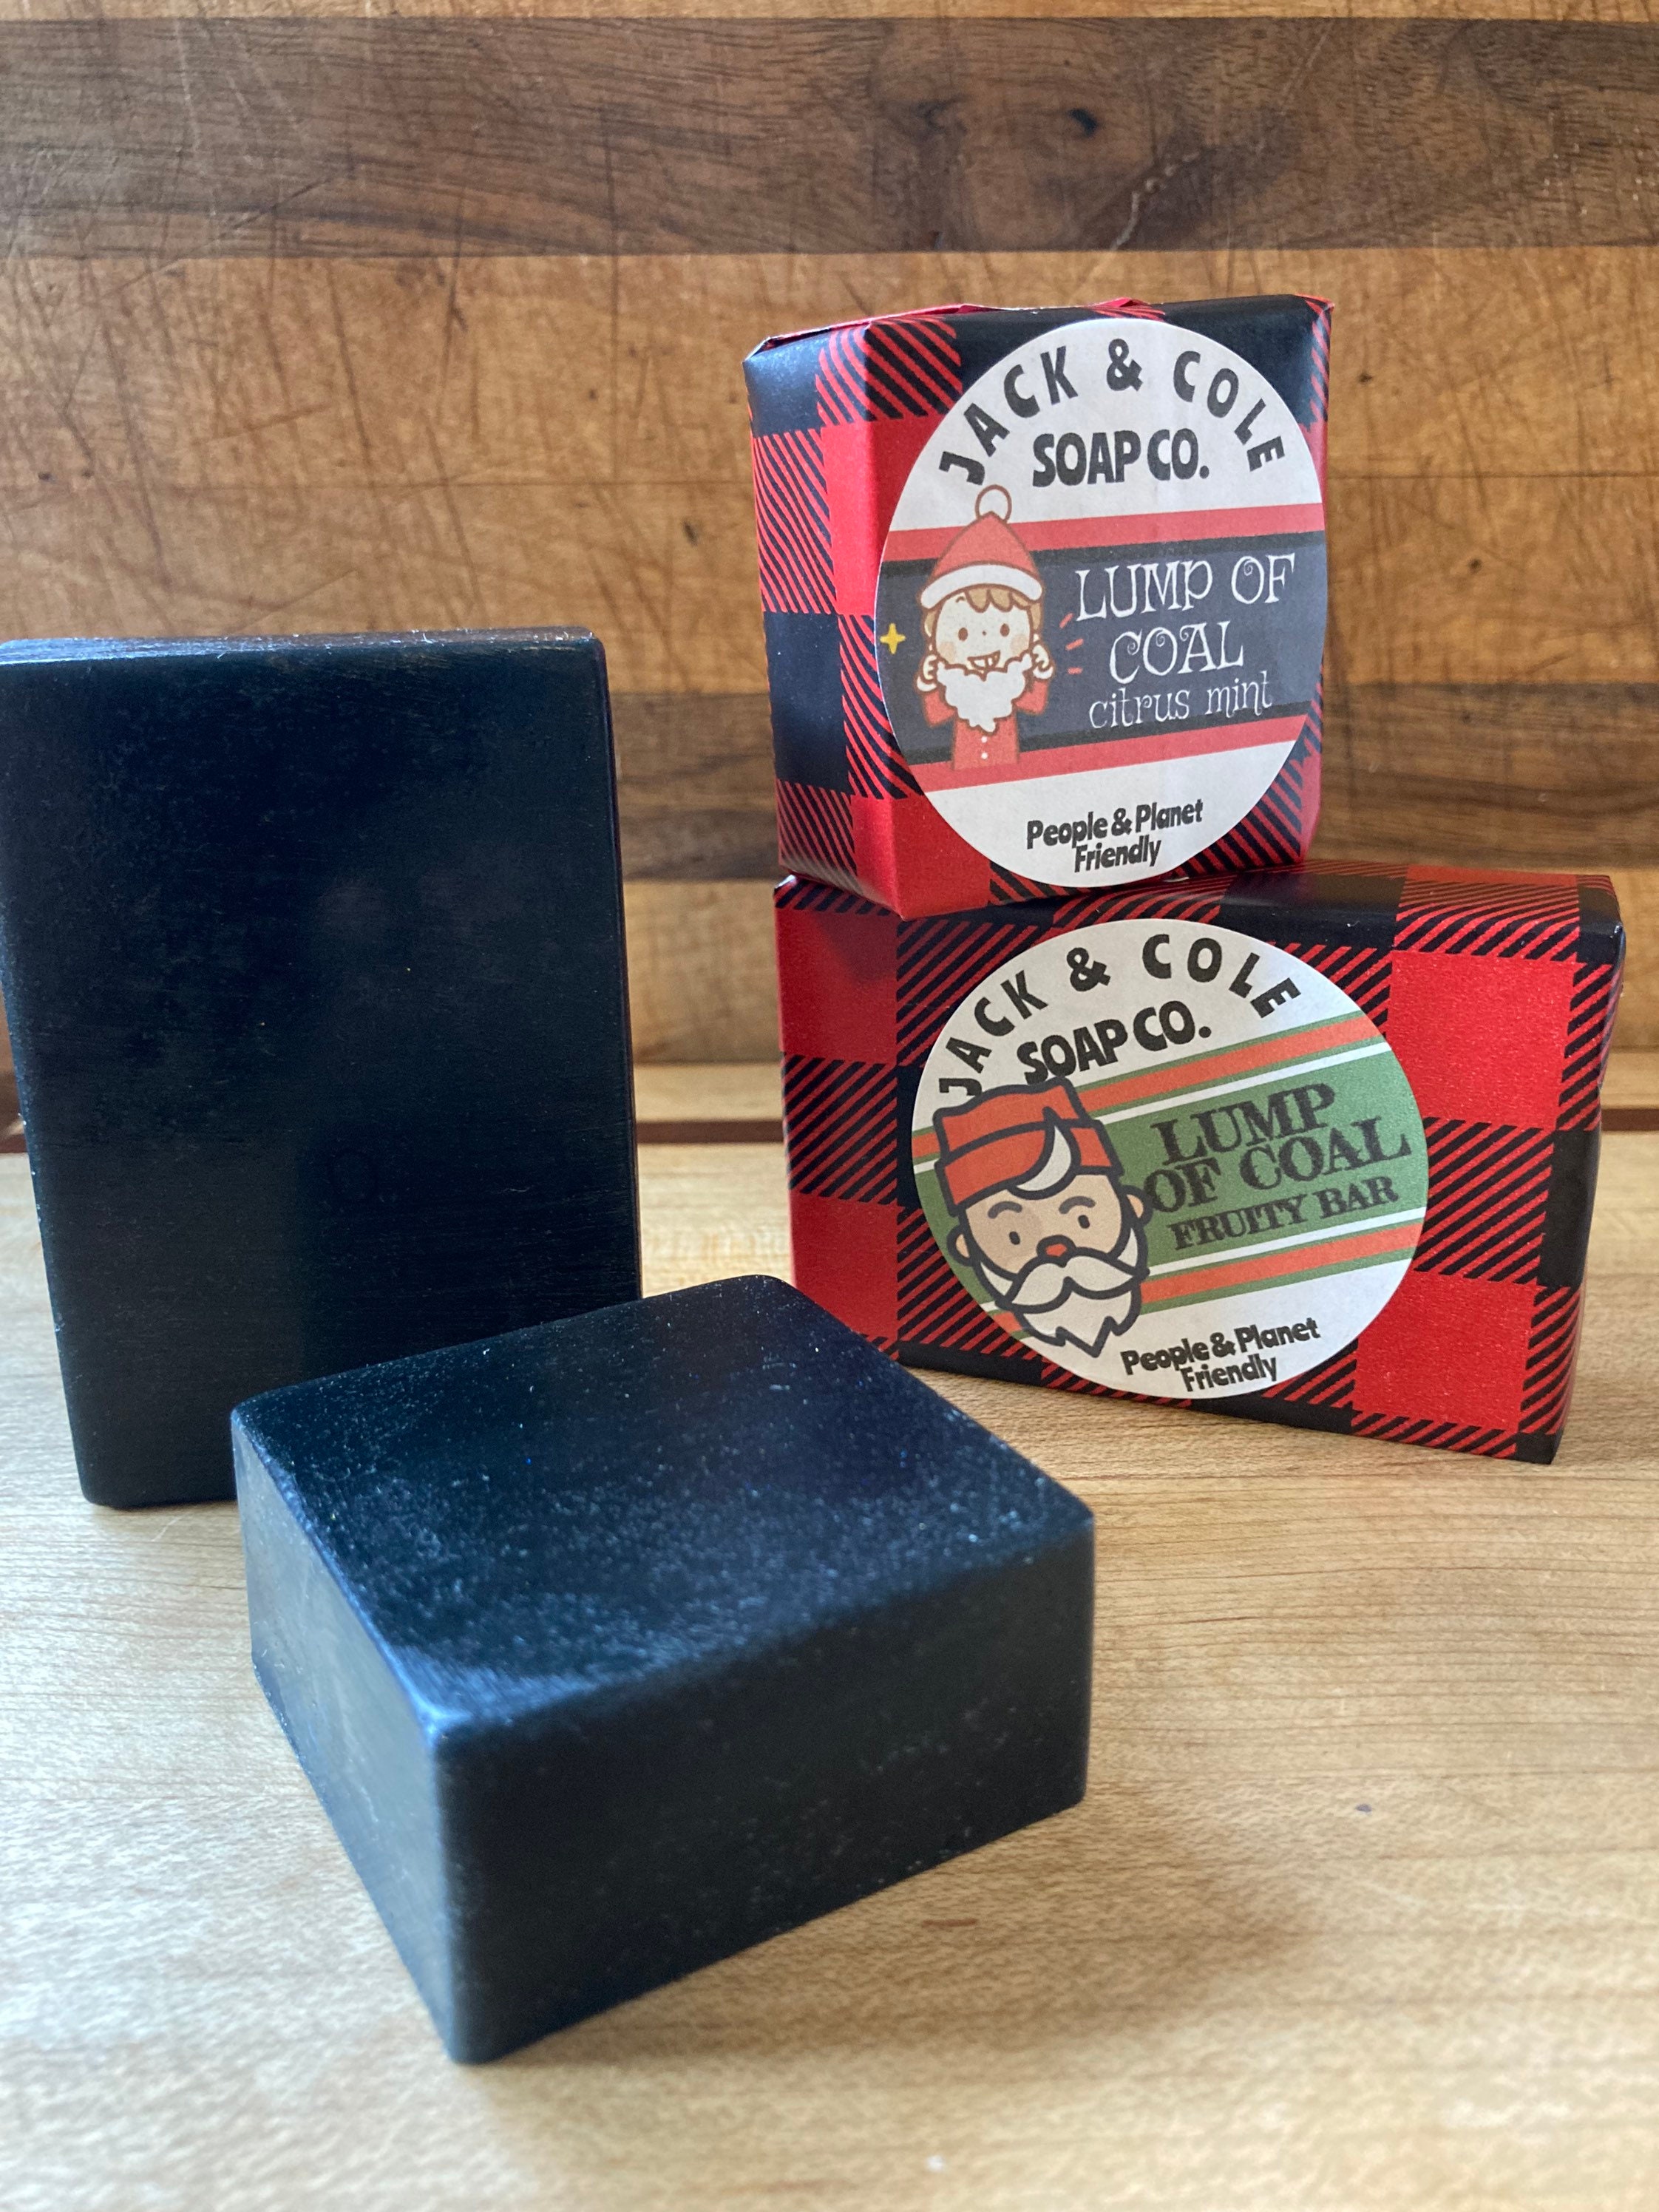 Set of 4 Merry Christmas Black Lump of Coal Money Soap With Real Money  Inside 1, 5, 10, 20 or 100, Pine Scented Stocking Stuffer 